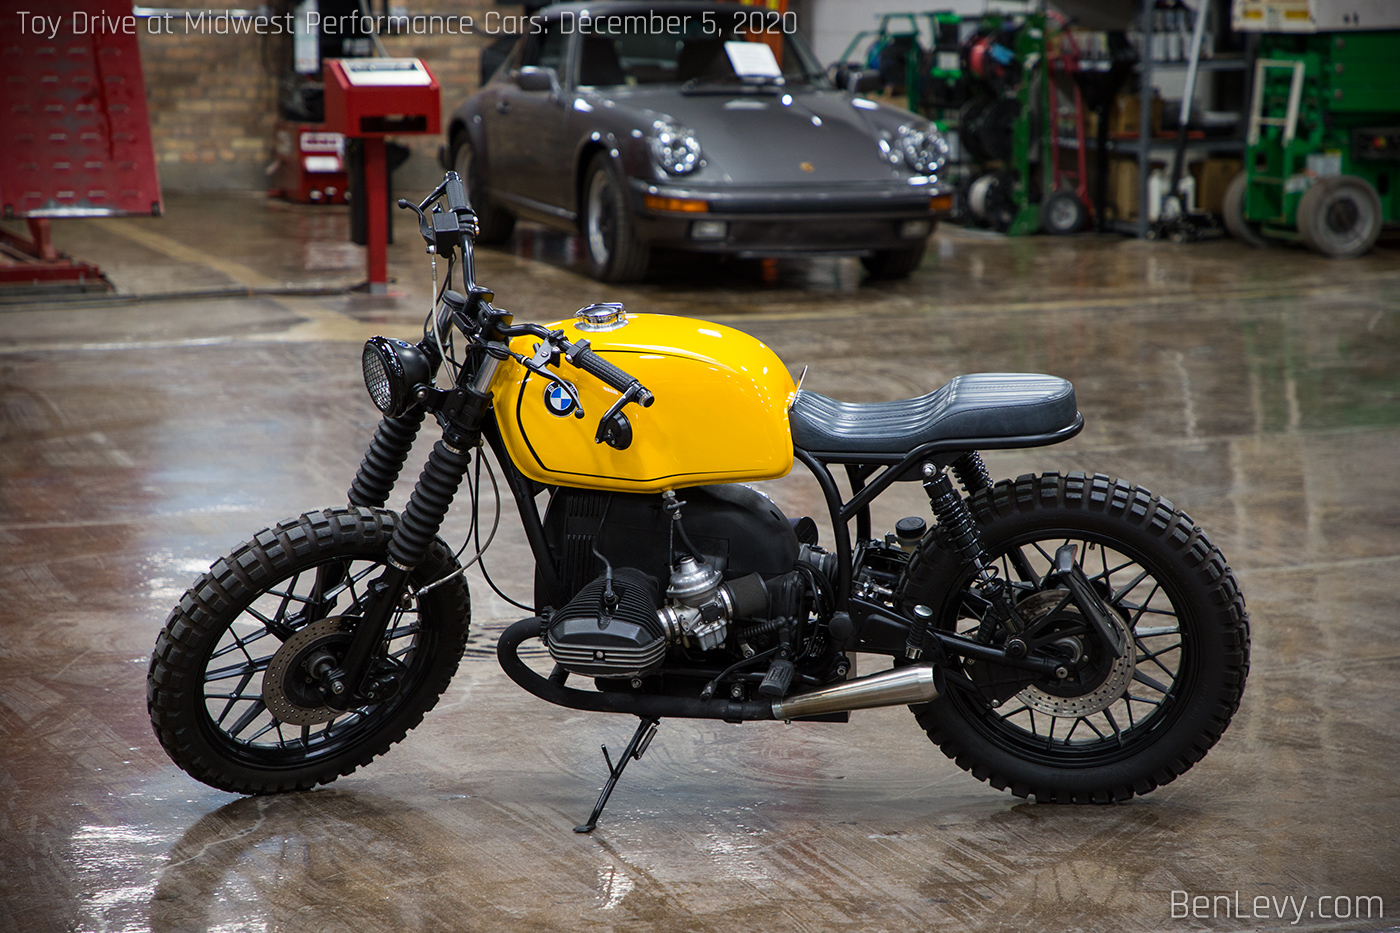 Restored BMW Motorcycle at Midwest Performance Cars